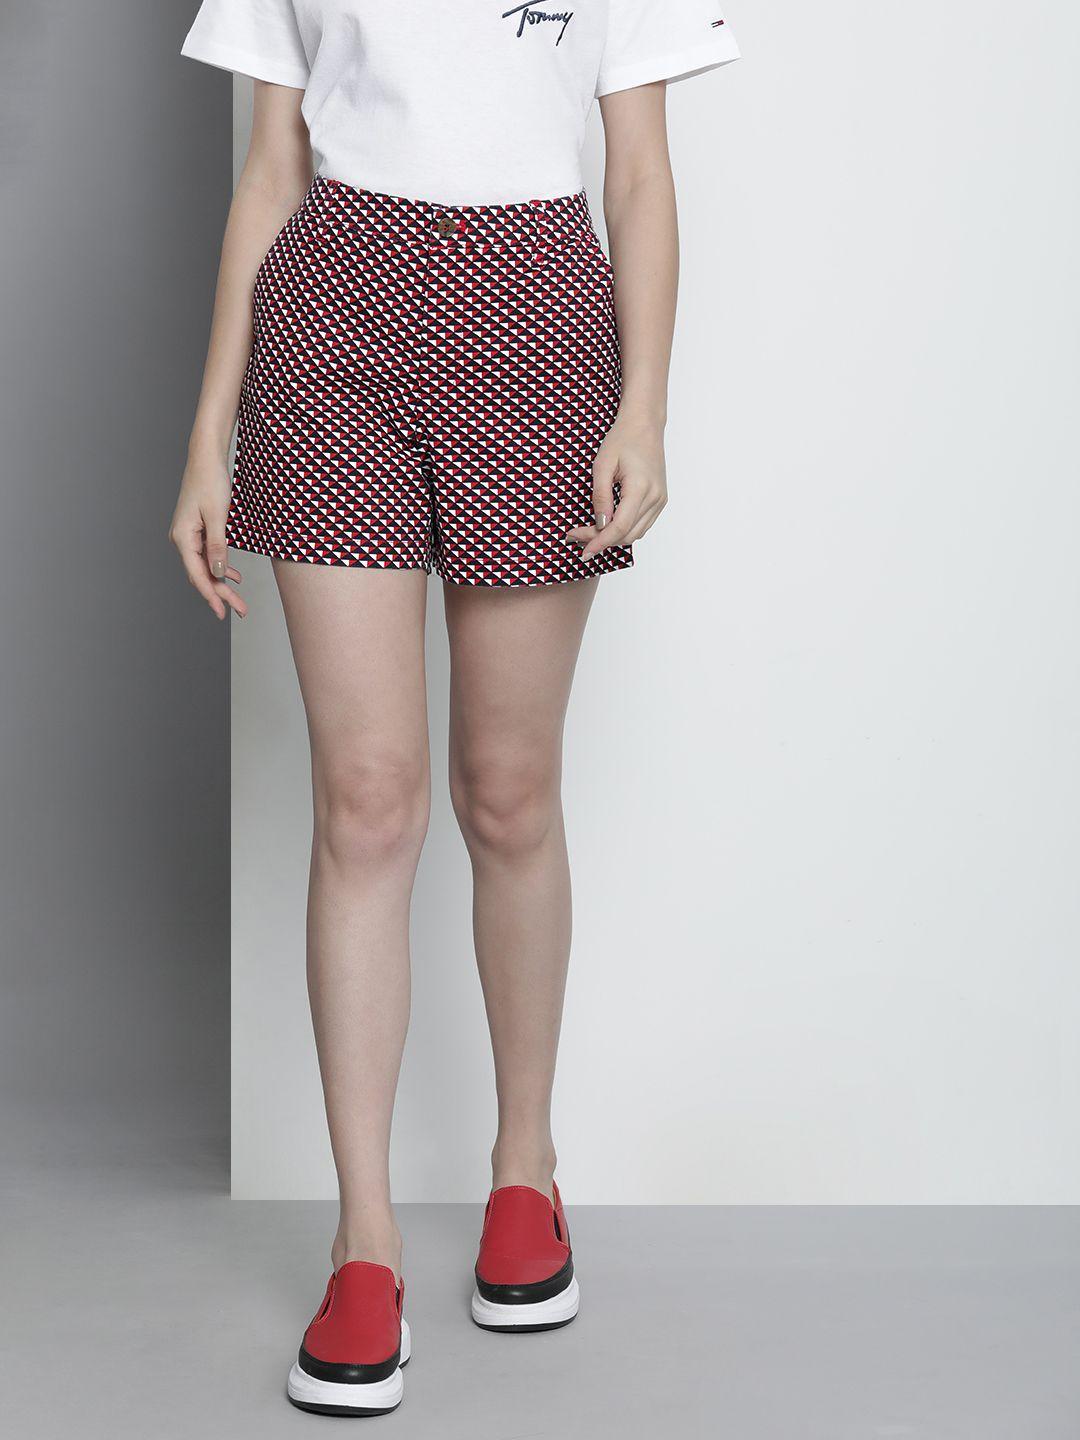 tommy hilfiger women red & navy blue printed chino shorts